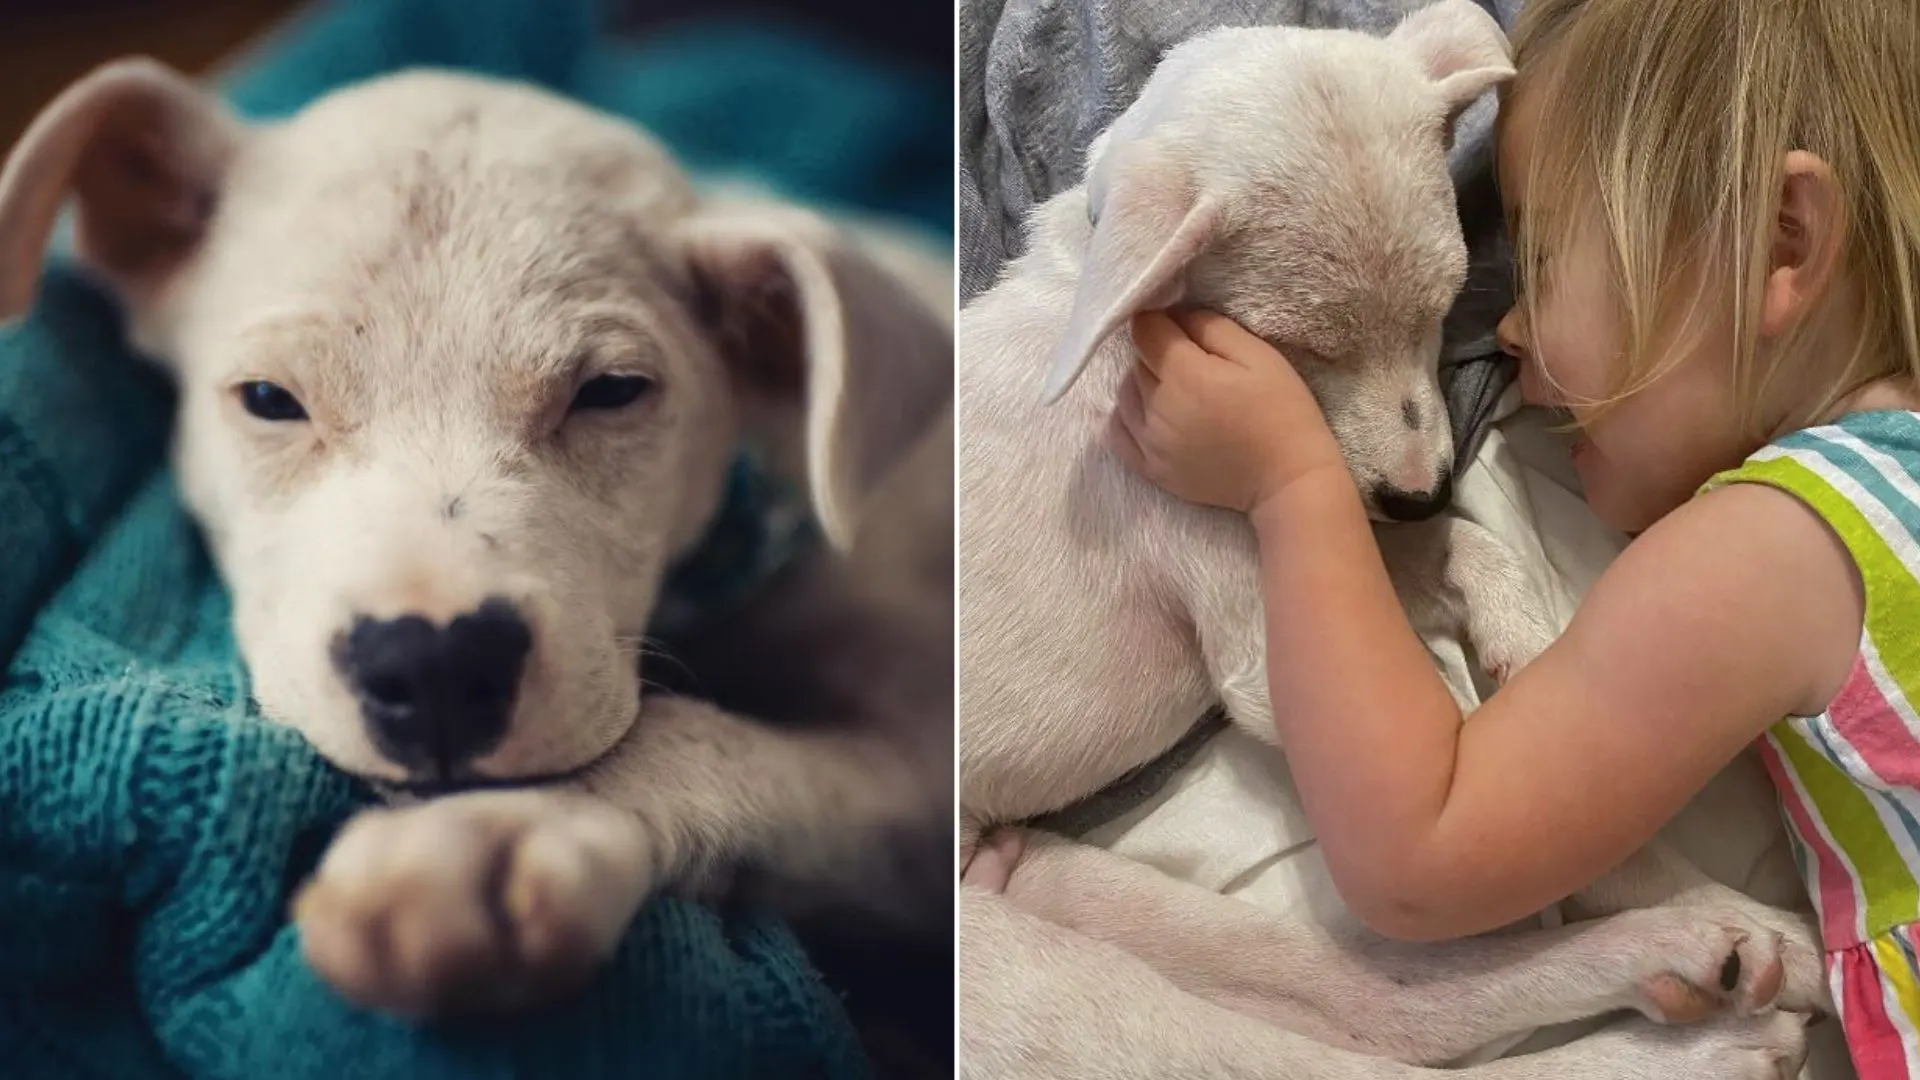 A Little Girl Convinces Her Mom To Adopt An Adorable Deaf Puppy